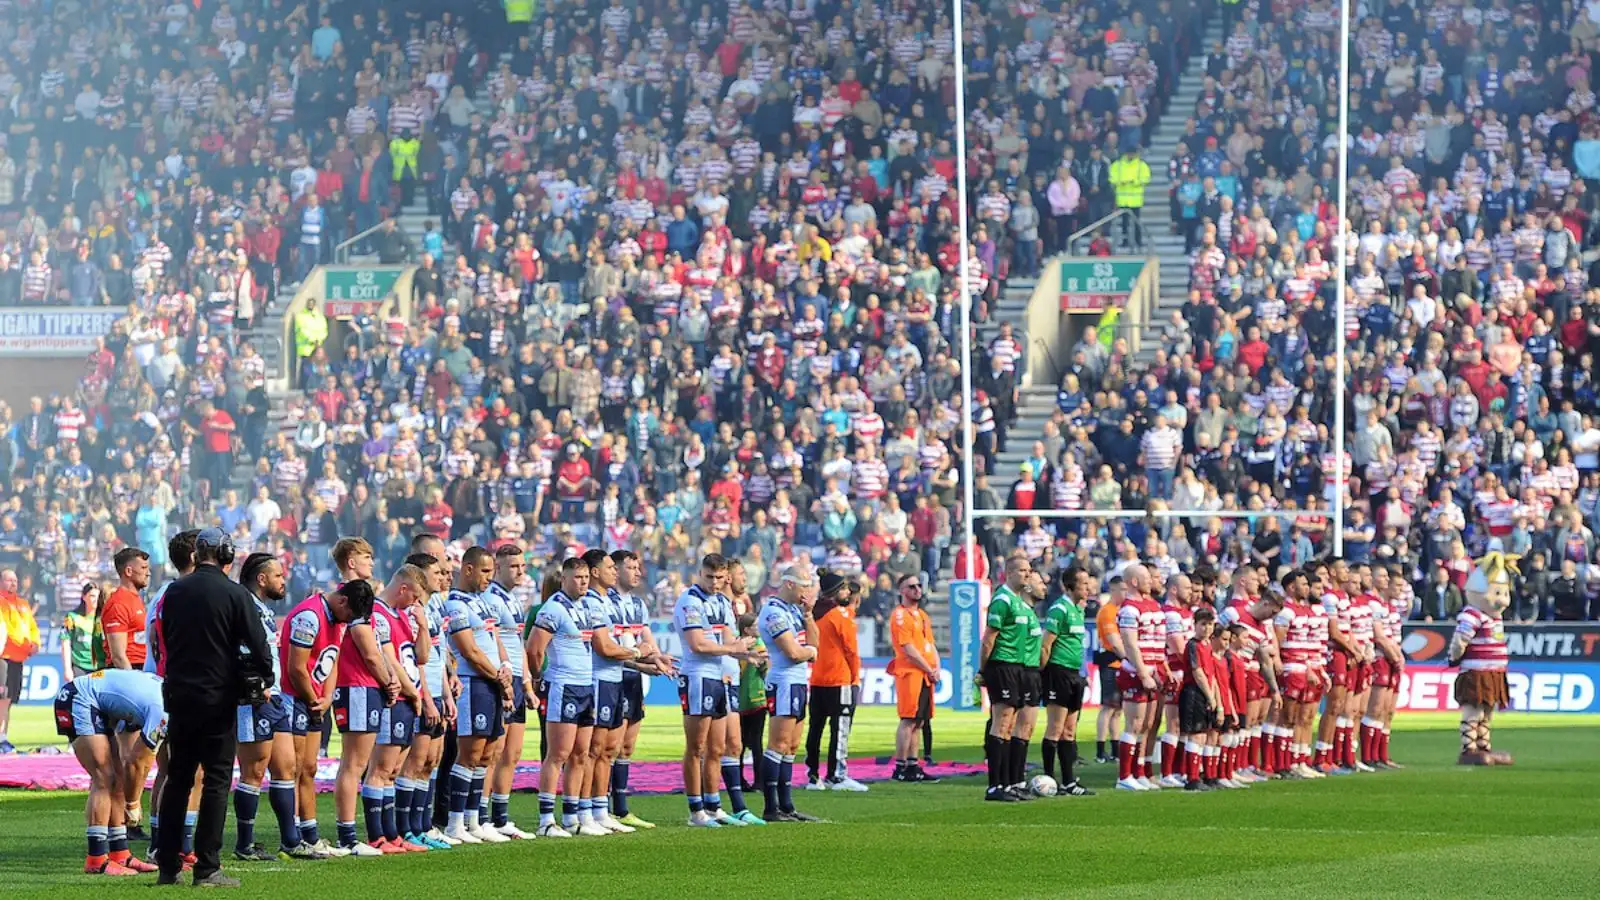 Upcoming Wigan fixture selected for Channel 4 Super League coverage